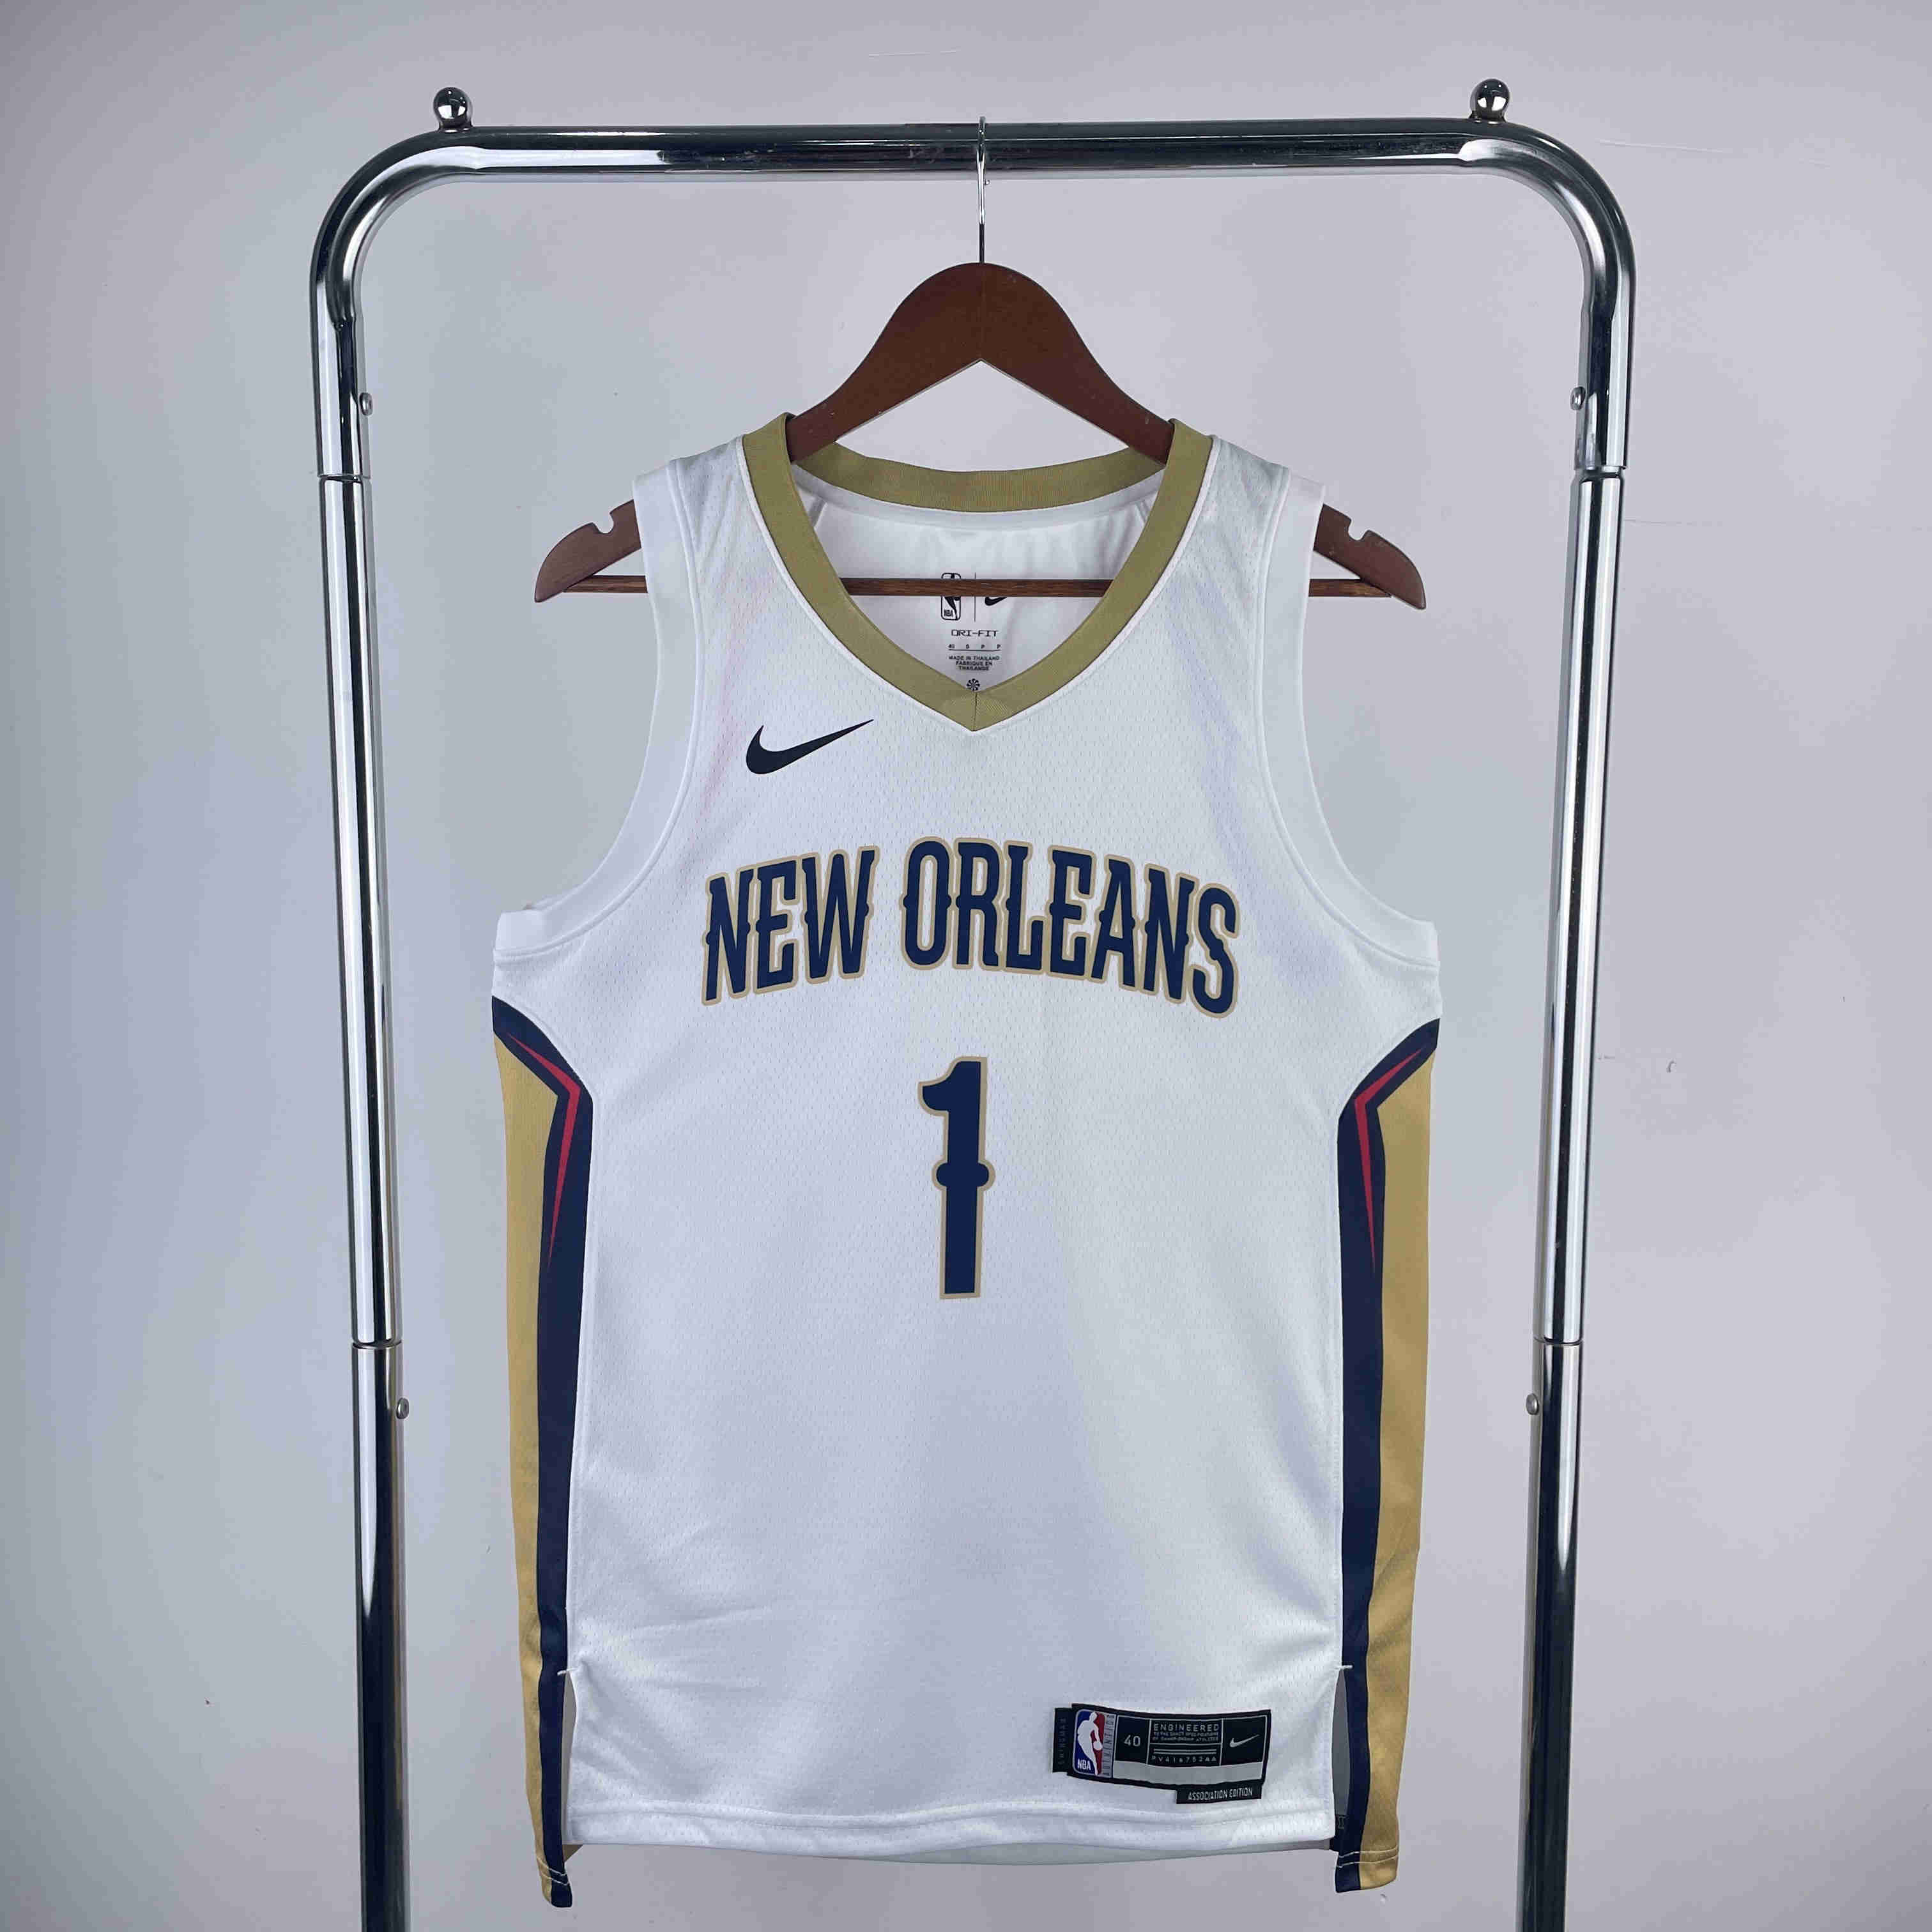  New Orleans Pelicans  NBA Jersey home white  Williams 1